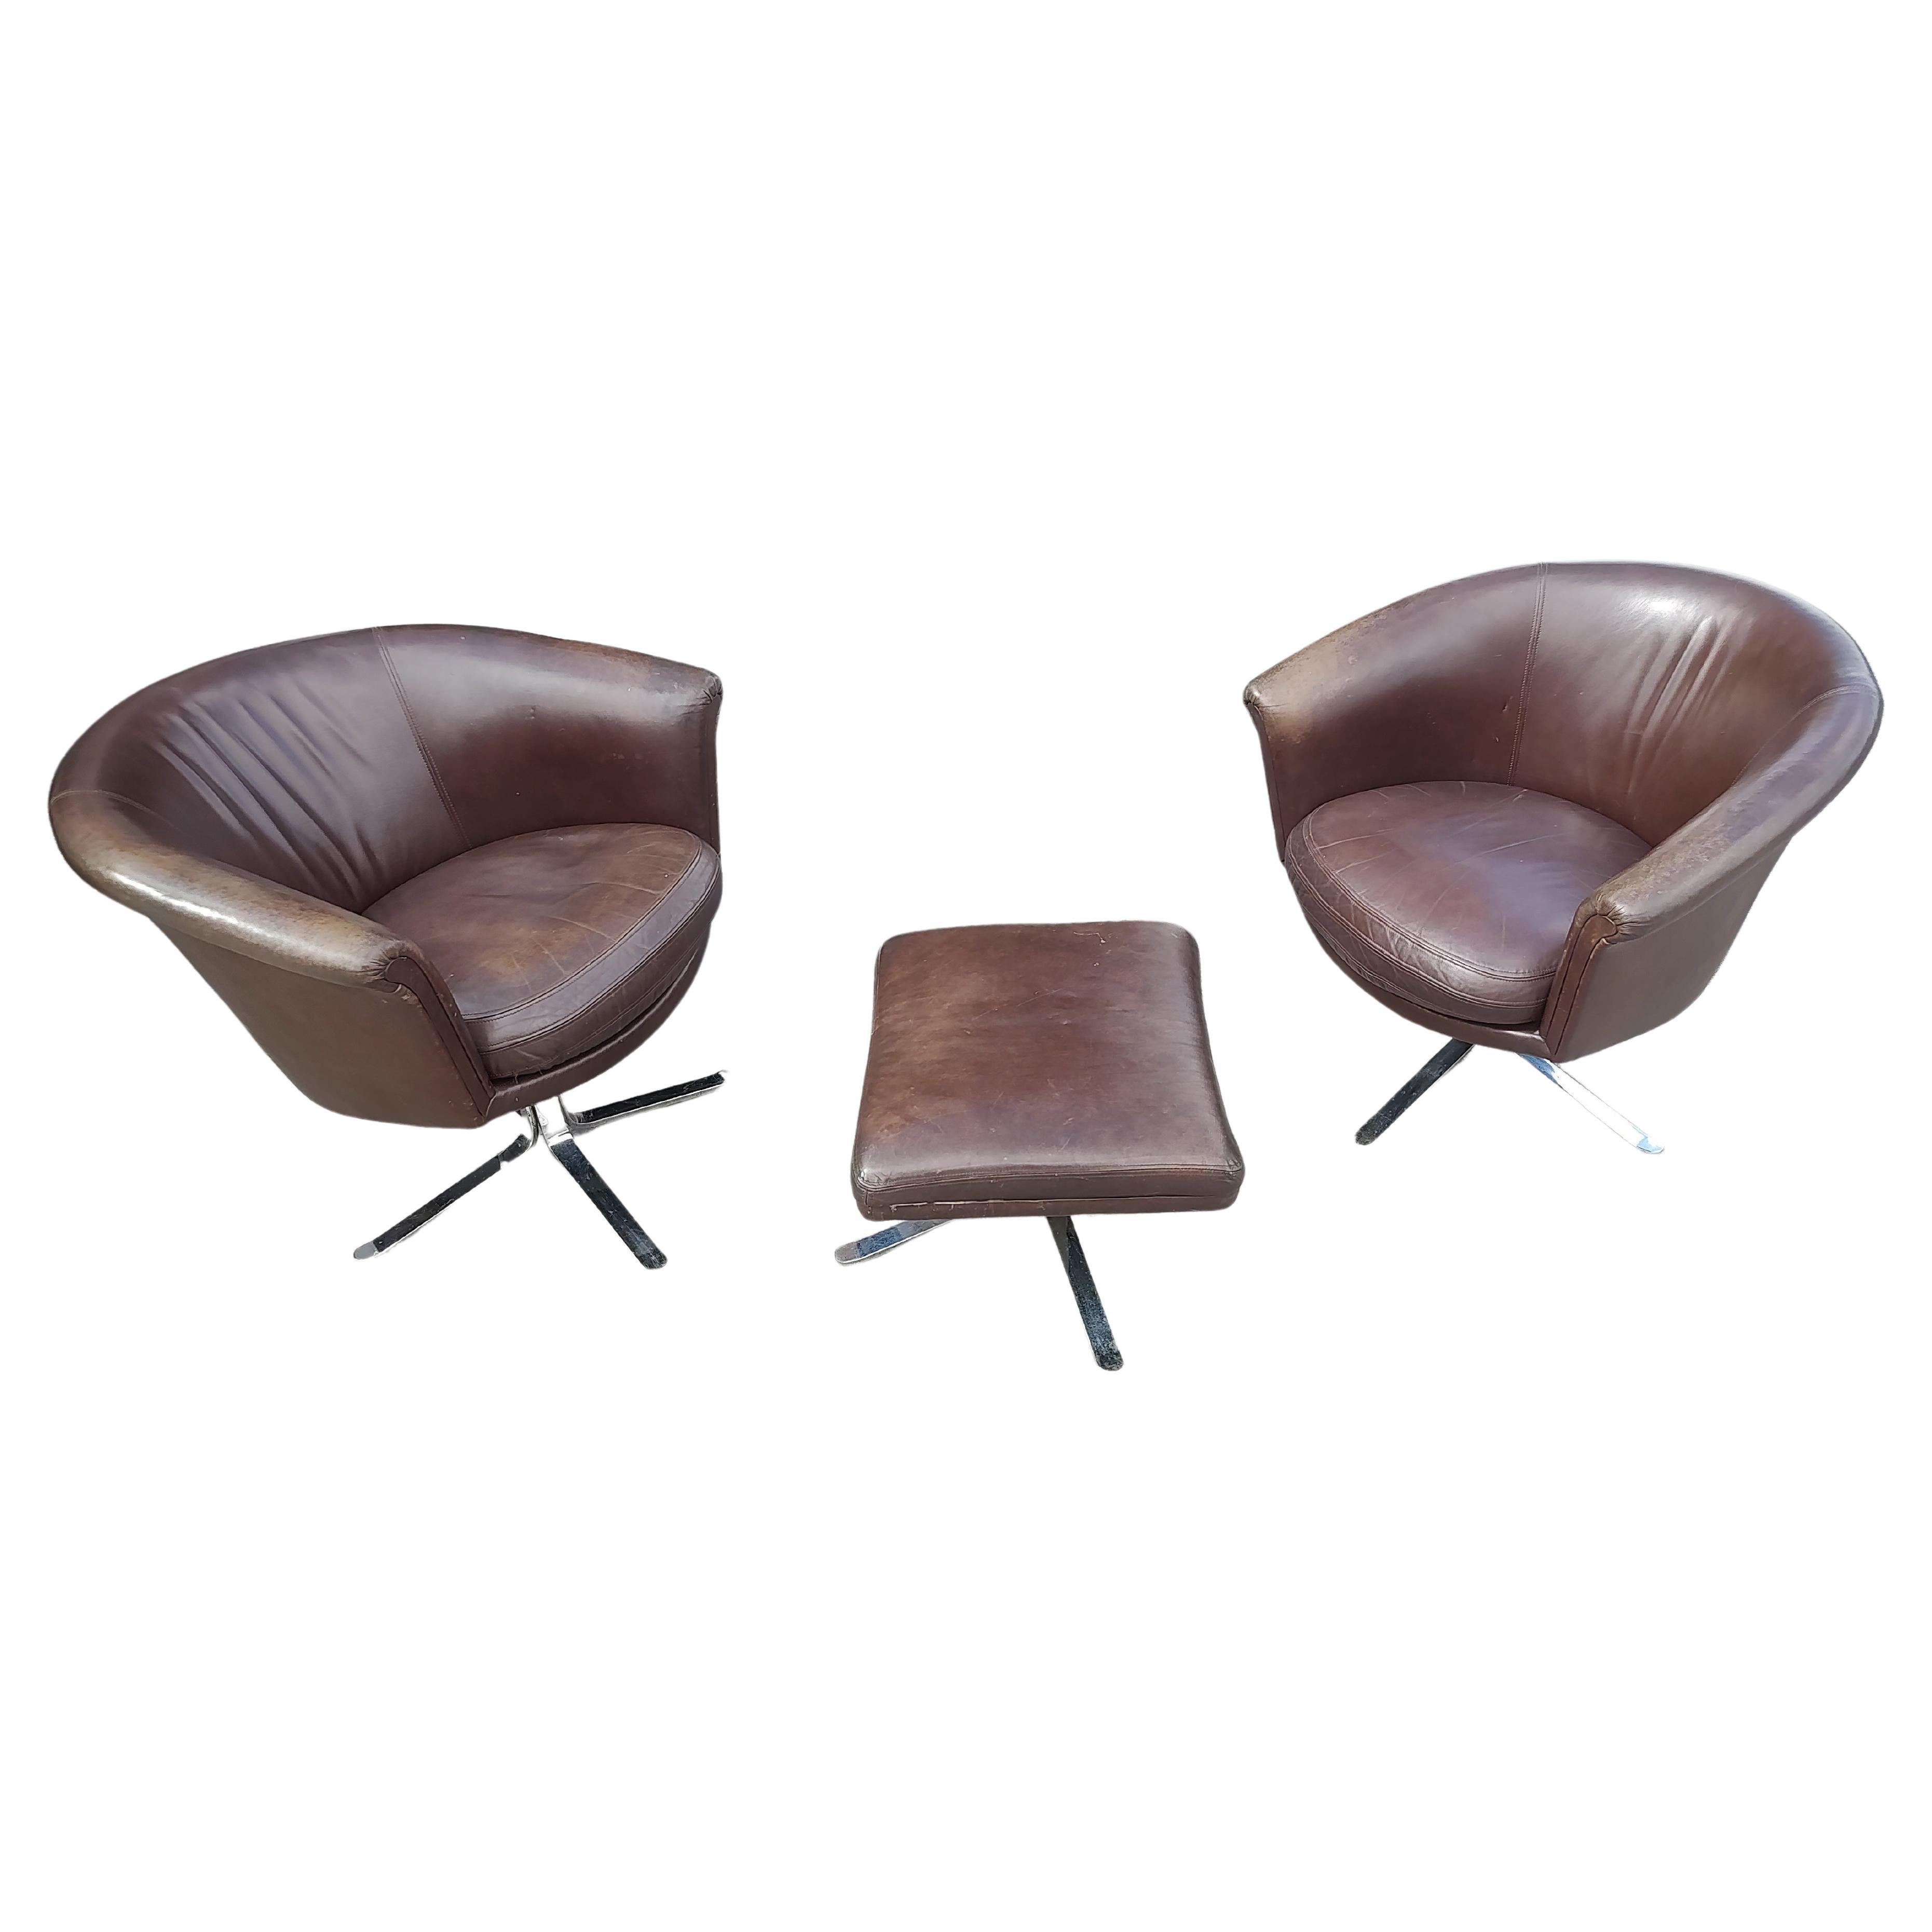 Fantastic pair of Mid Century Modern Sculptural Swiveling Lounge chairs in leather with an ottoman. Heavy duty frame with great style and support. Very comfortable, one chair is a bit higher than the other, 1.5 inches. Nicos Zographos chairs with